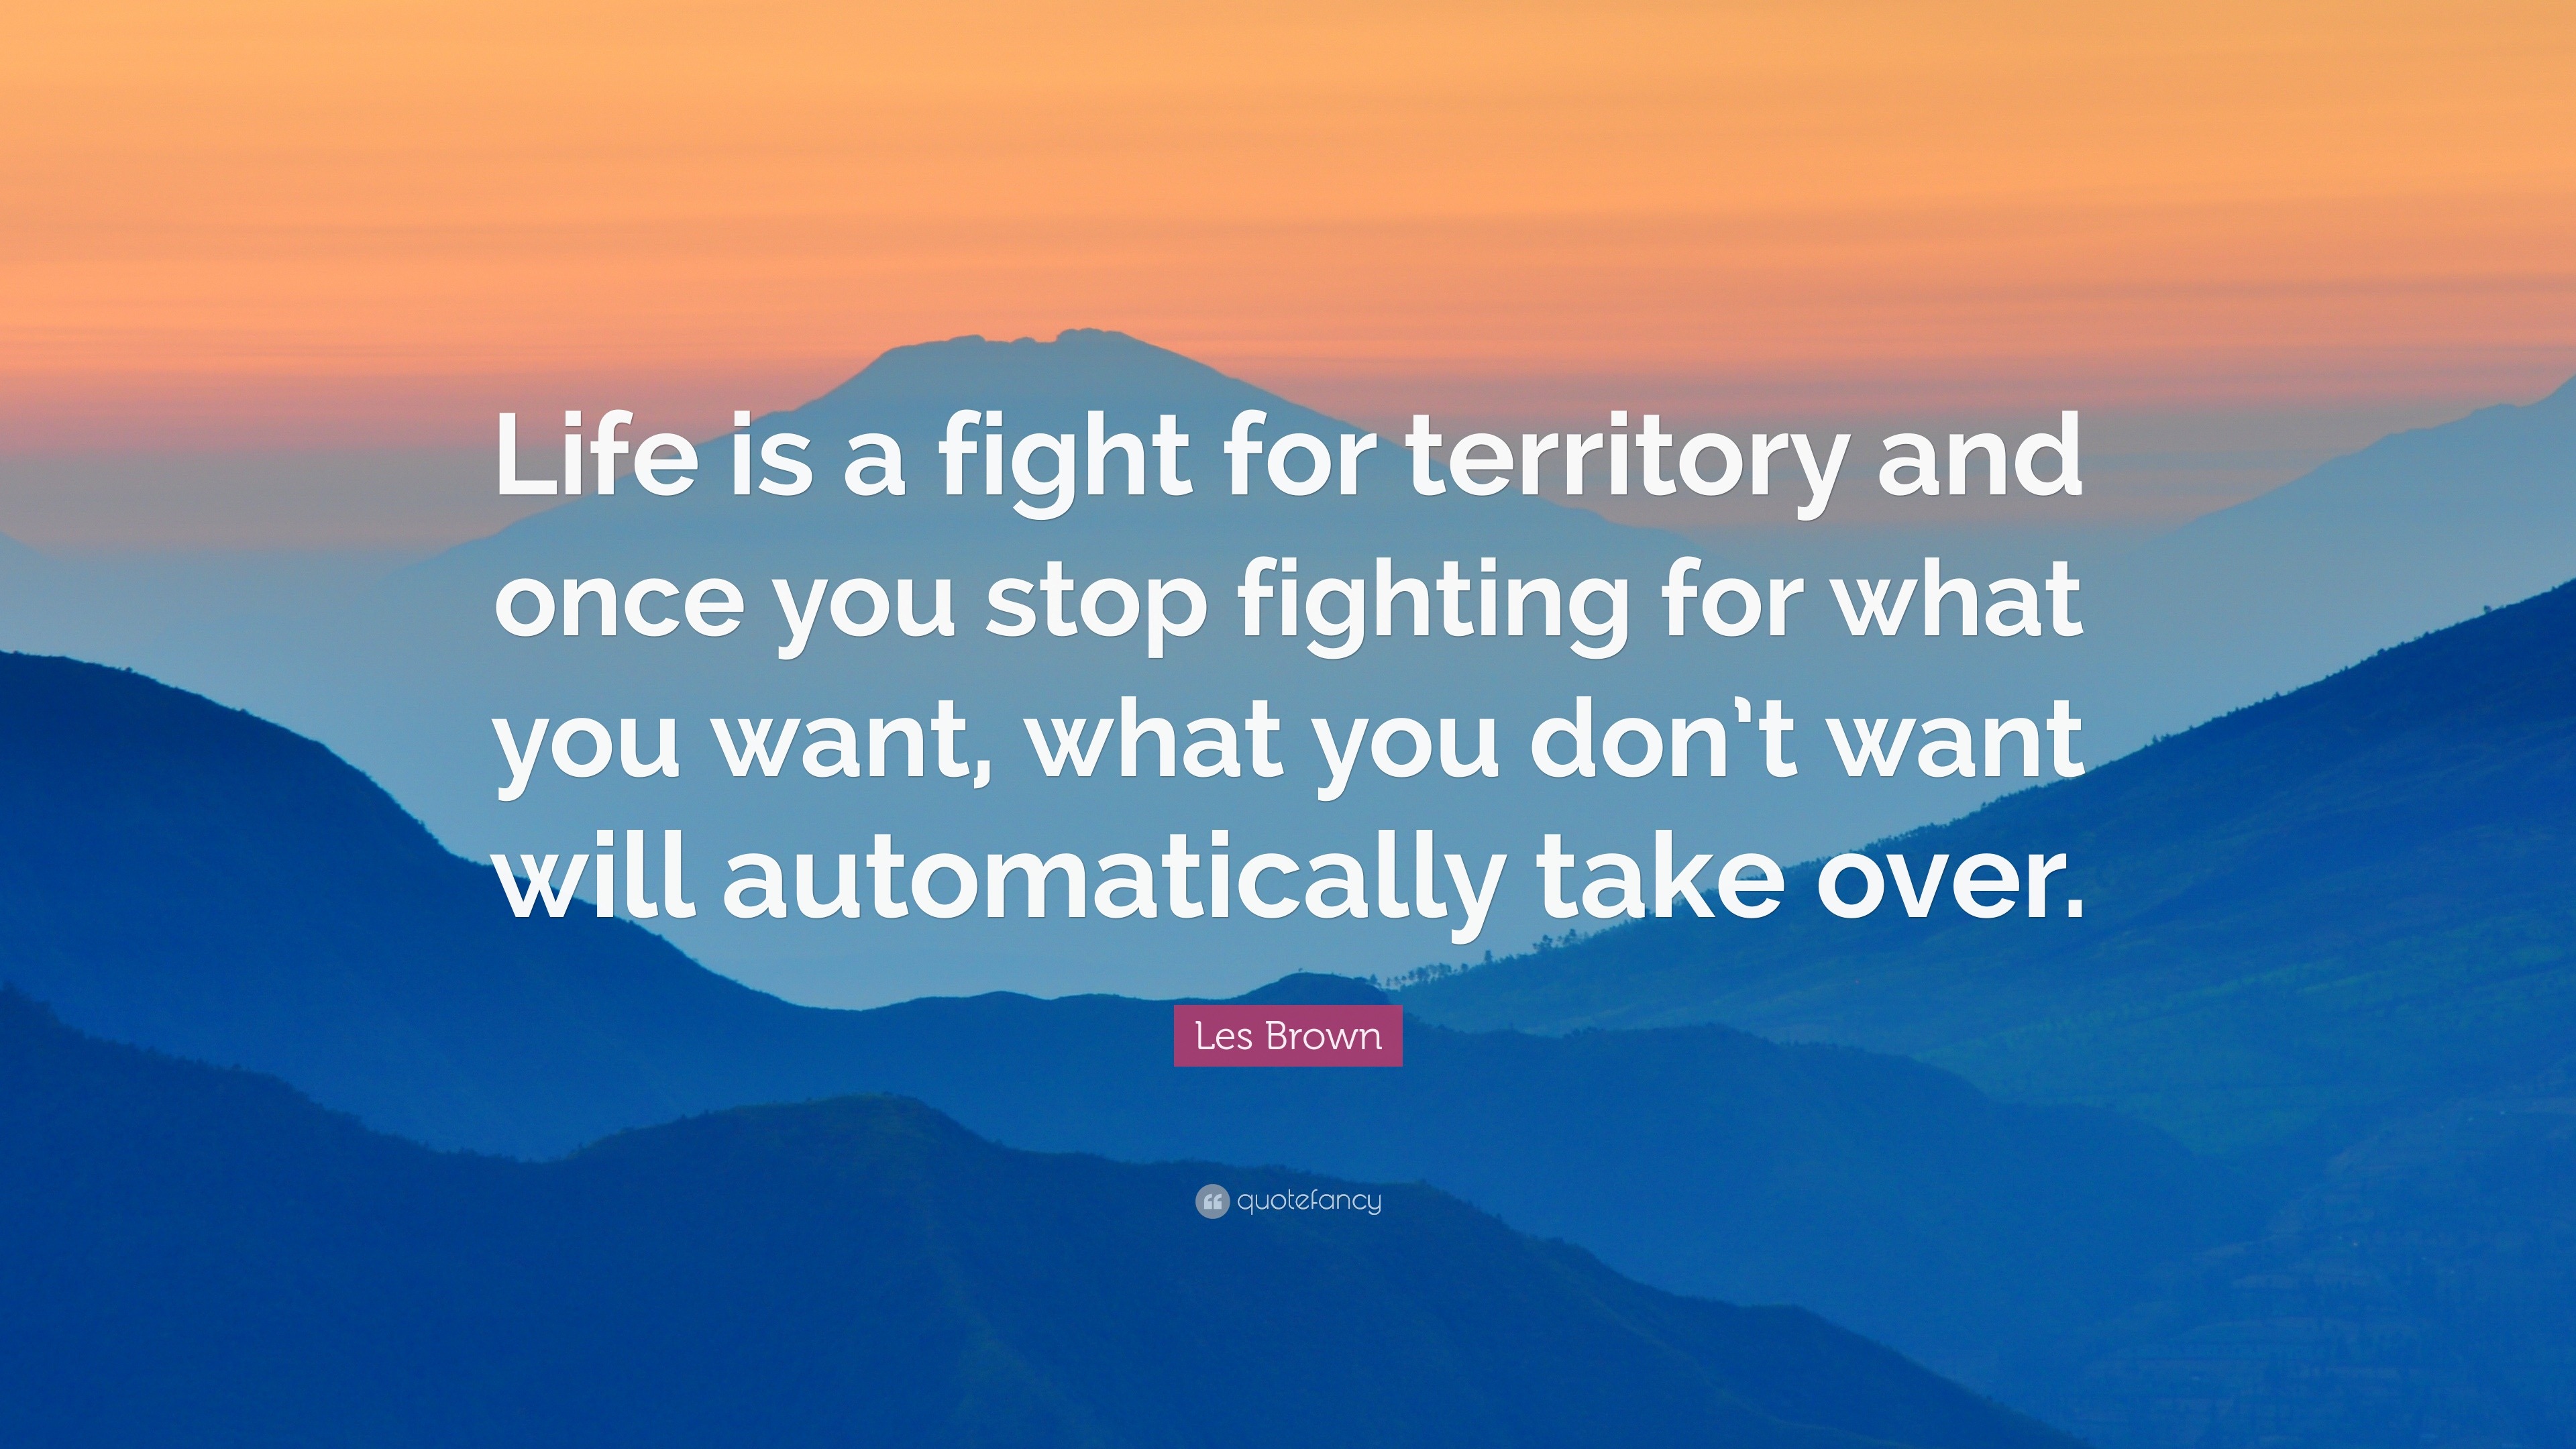 64312-Les-Brown-Quote-Life-is-a-fight-for-territory-and-once-you-stop.jpg